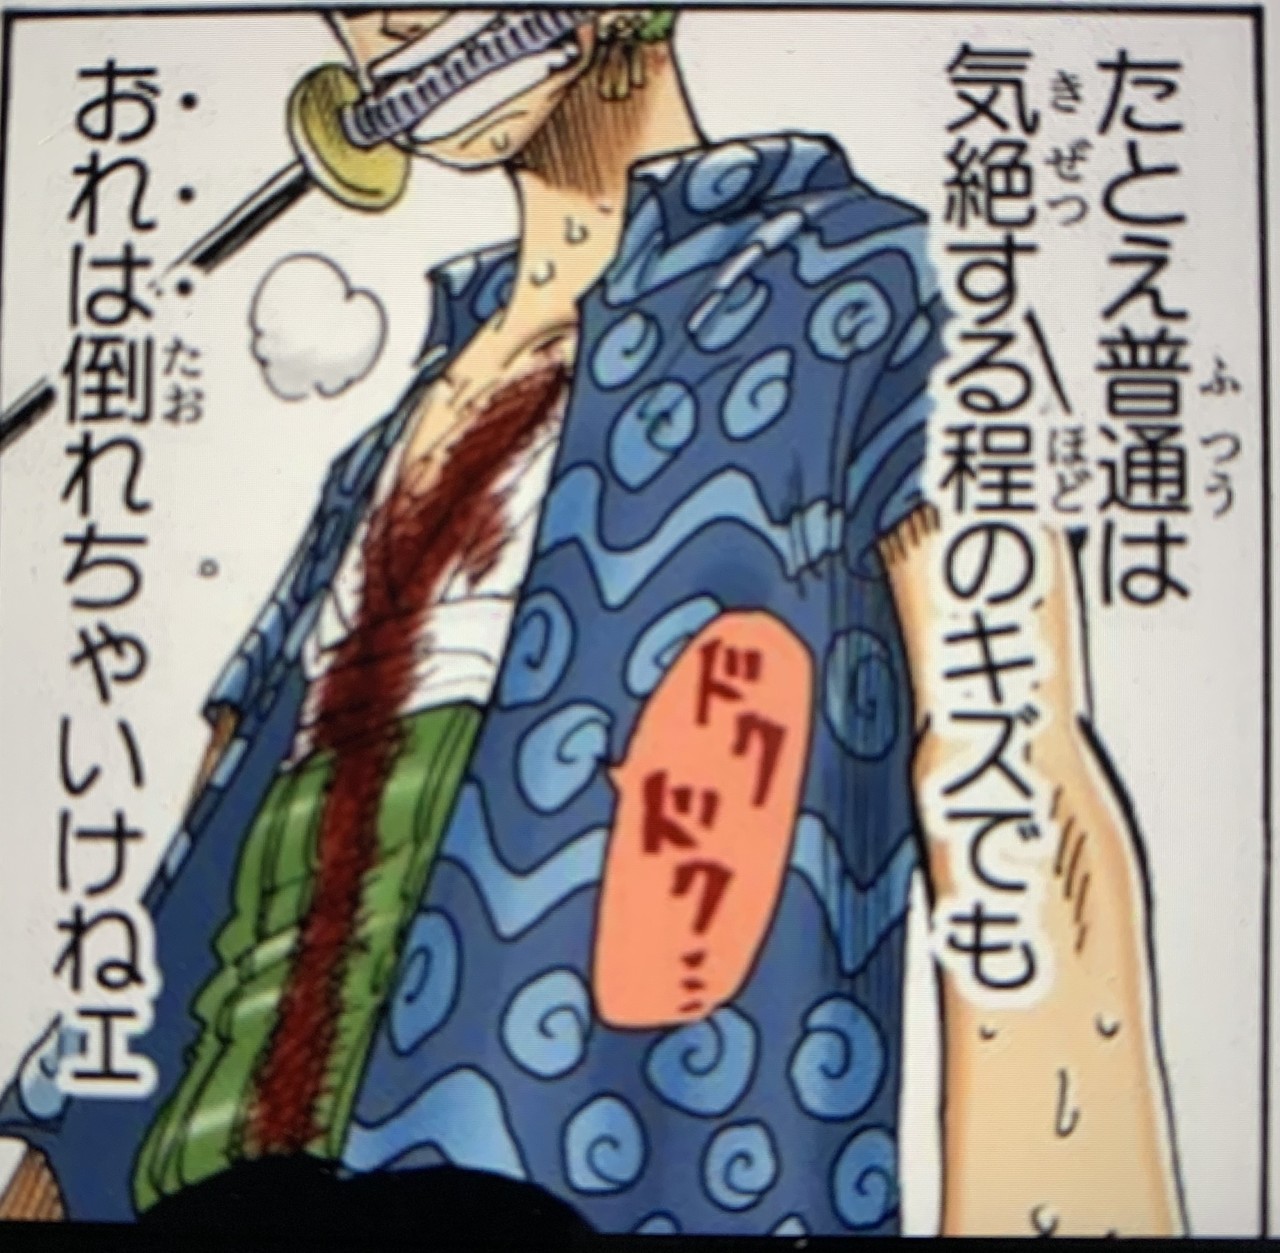 One Pieceは人生の教科書 普通じゃない人生を送るには 山野 礁太 ライター One Piece学 研究家 Note